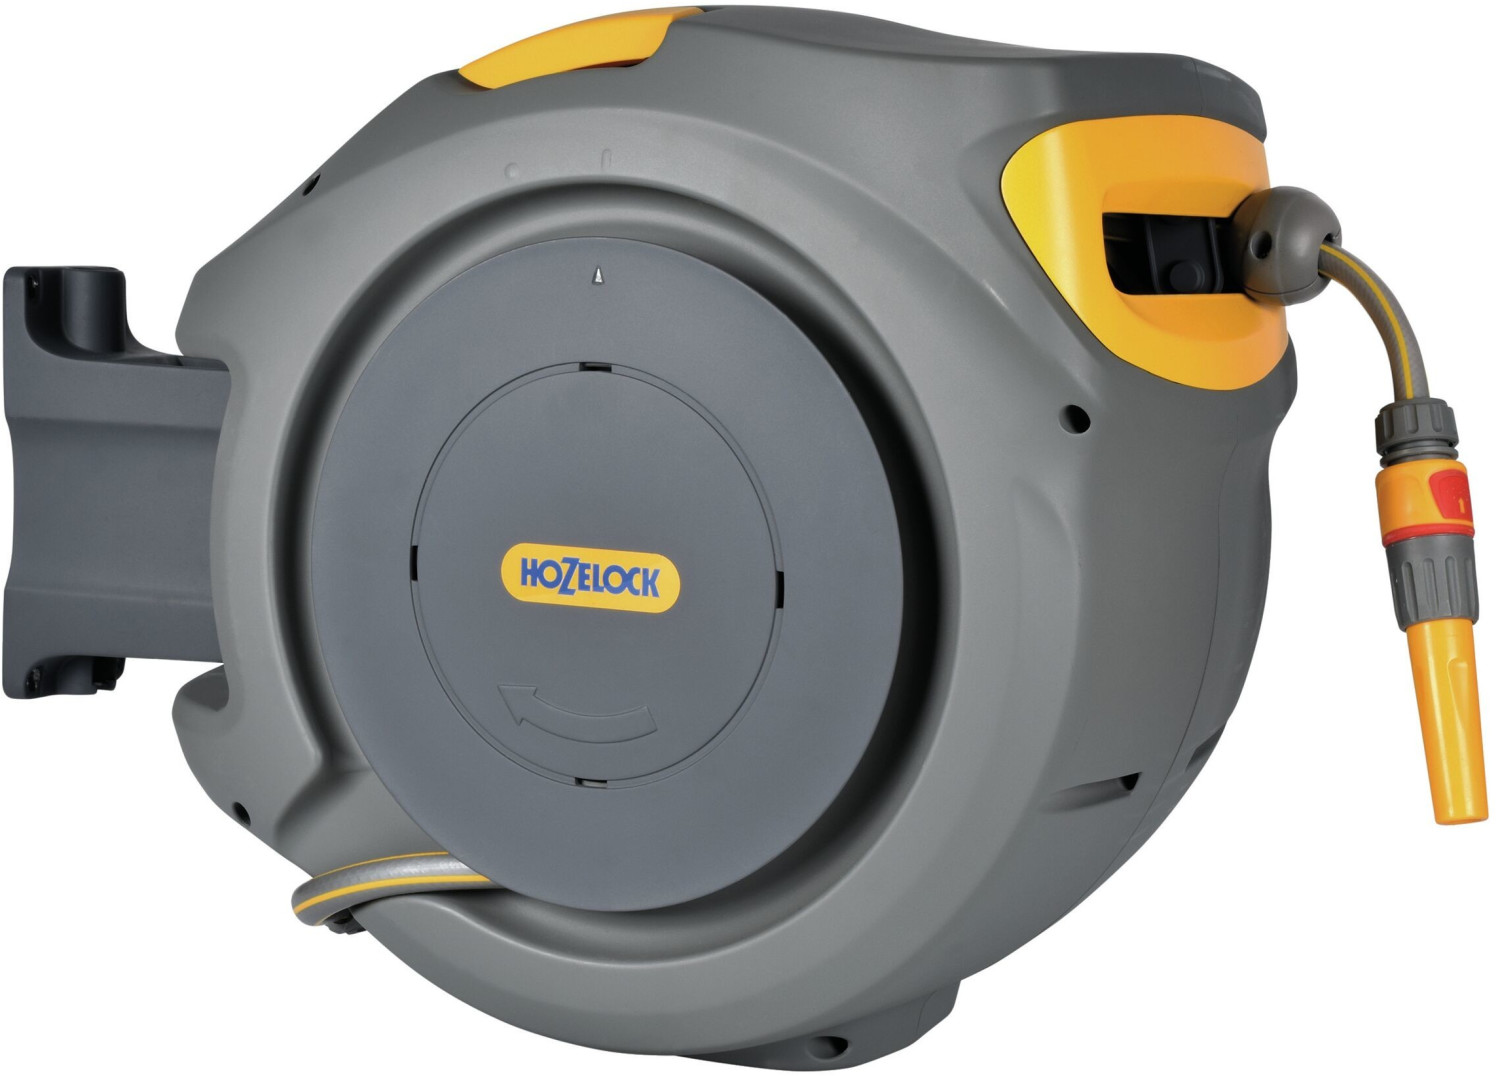 Buy Hozelock AutoReel with 30m Hose from £89.99 (Today) – Best Deals on